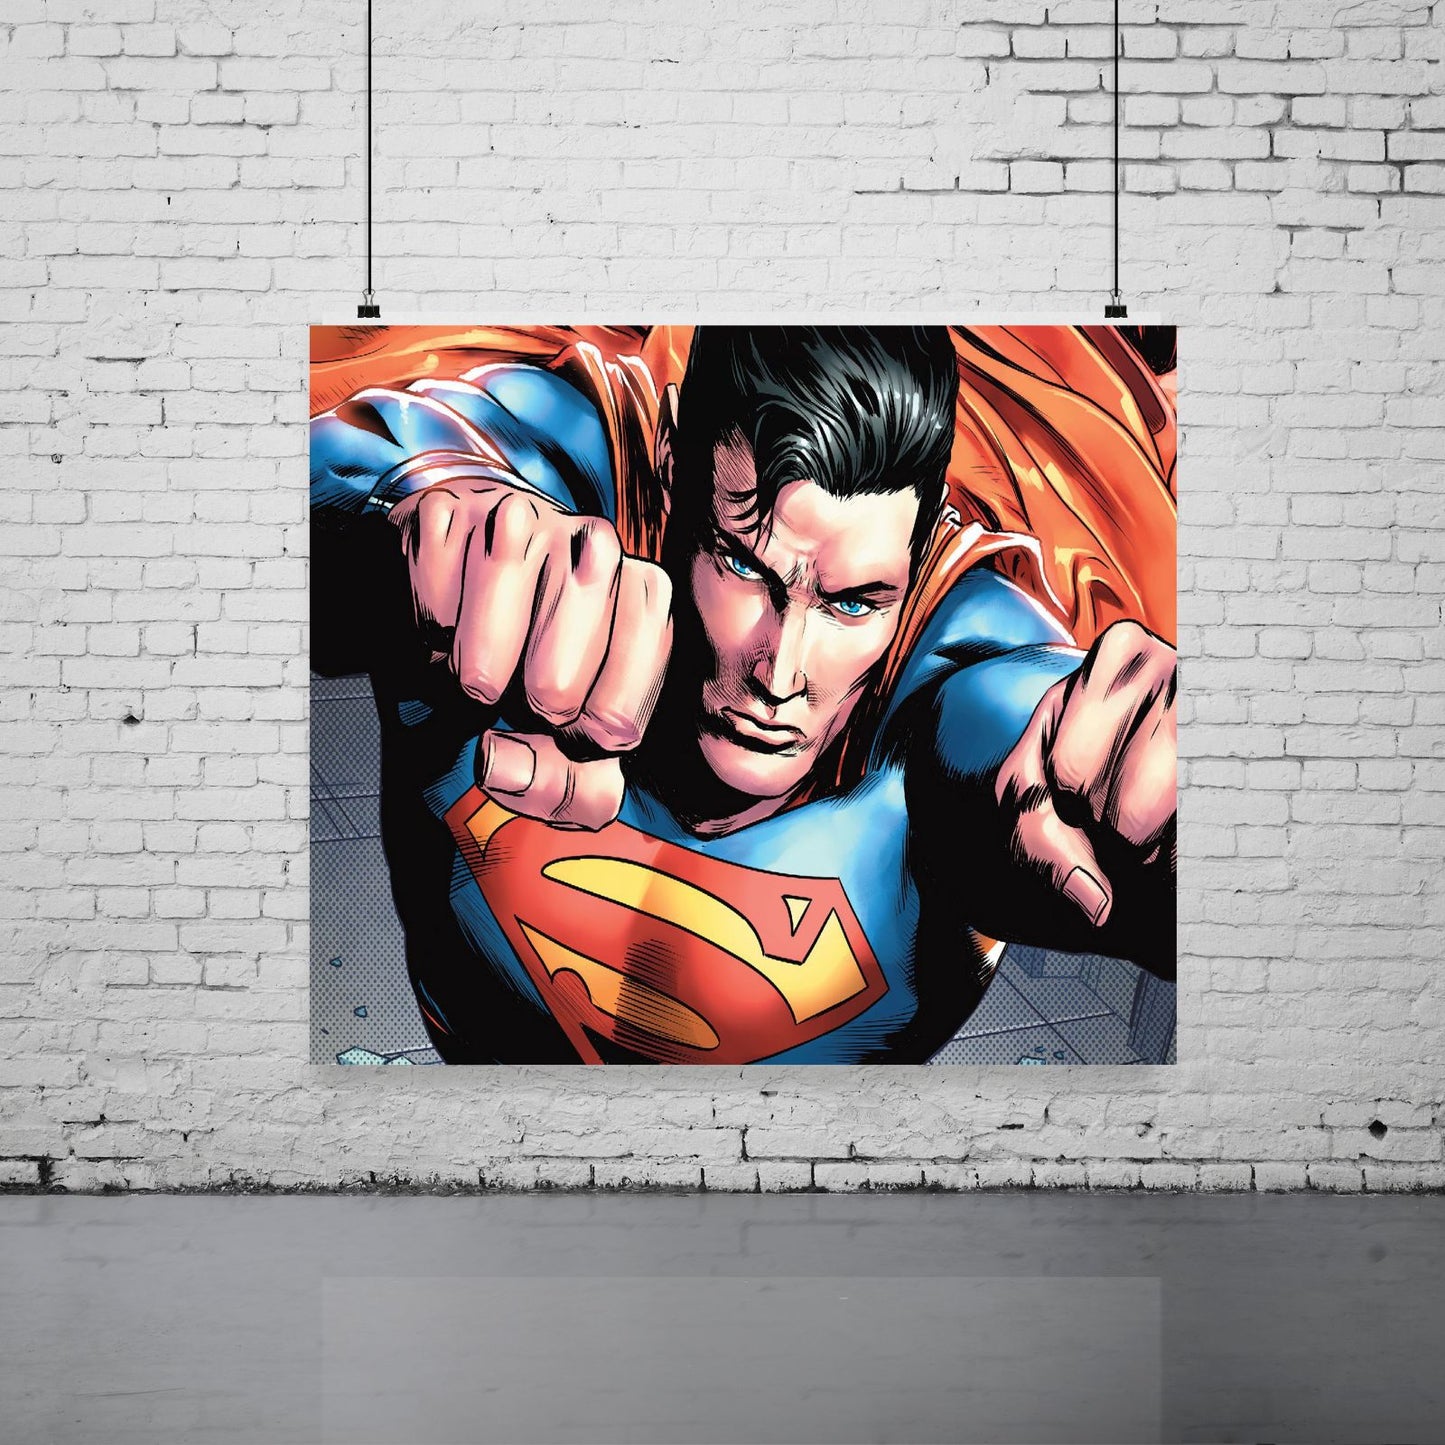 Justice League - You can not save the world alone ! (Set of 5 Prints)